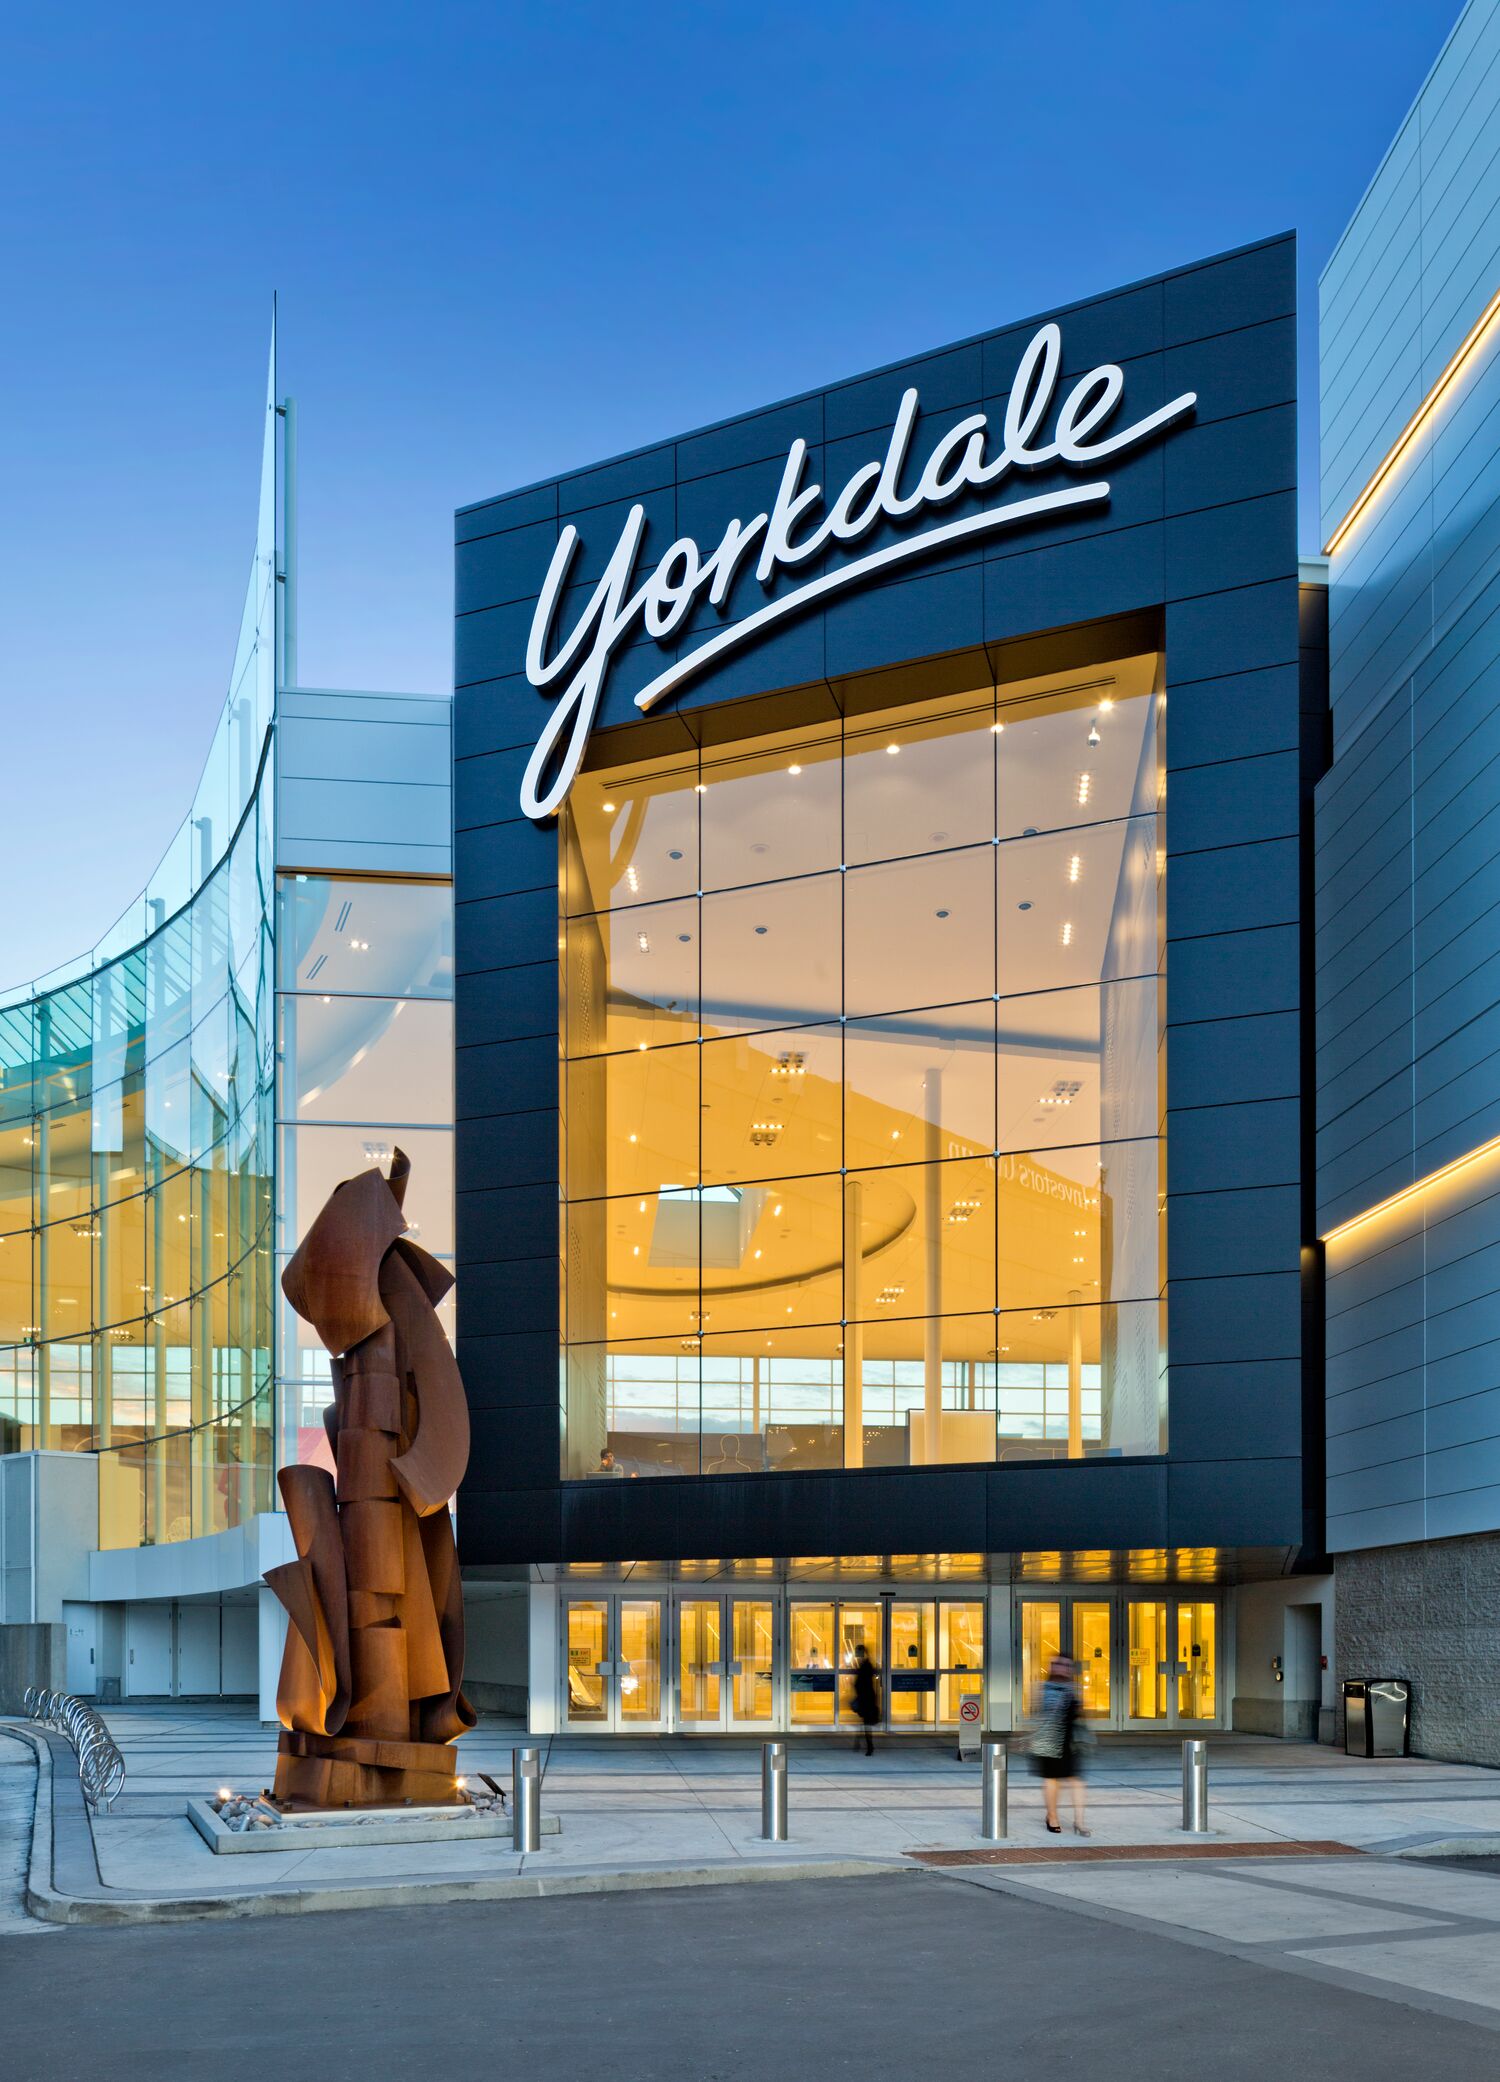 Shopping at Yorkdale Shopping Centre